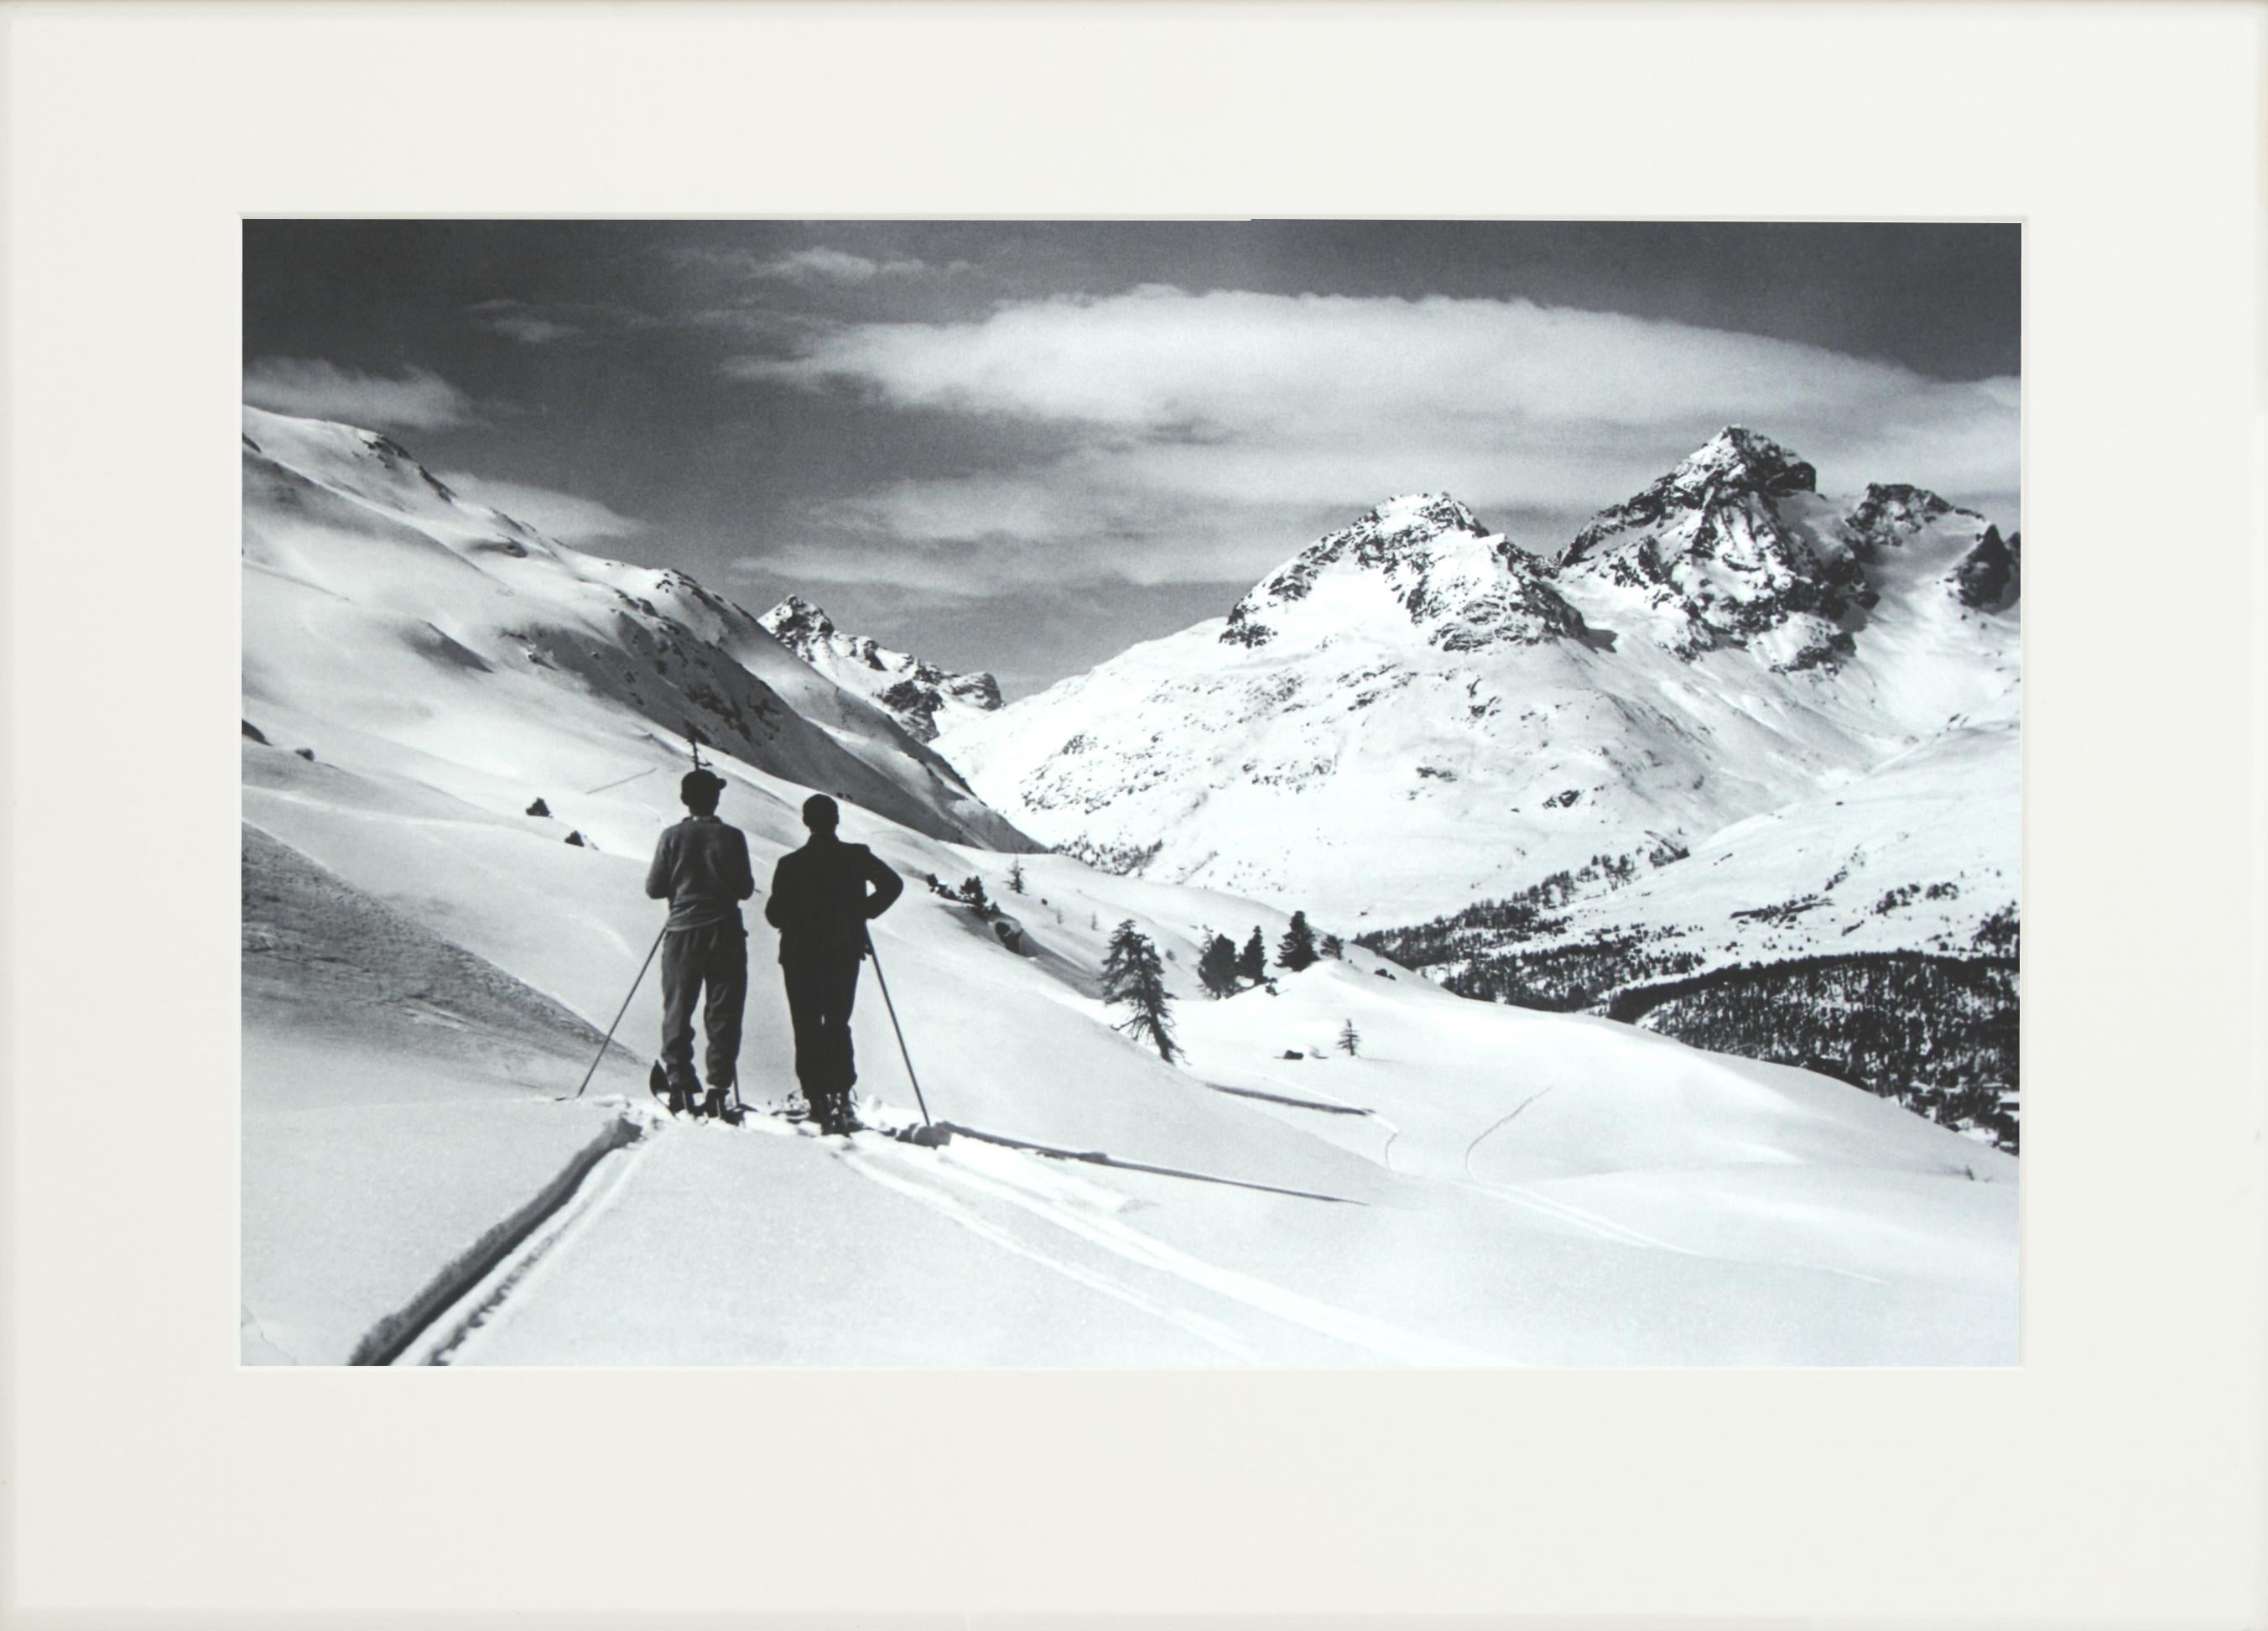 Sporting Art Alpine Ski Photograph, 'Panoramic View', Taken from Original 1930s Photograph For Sale